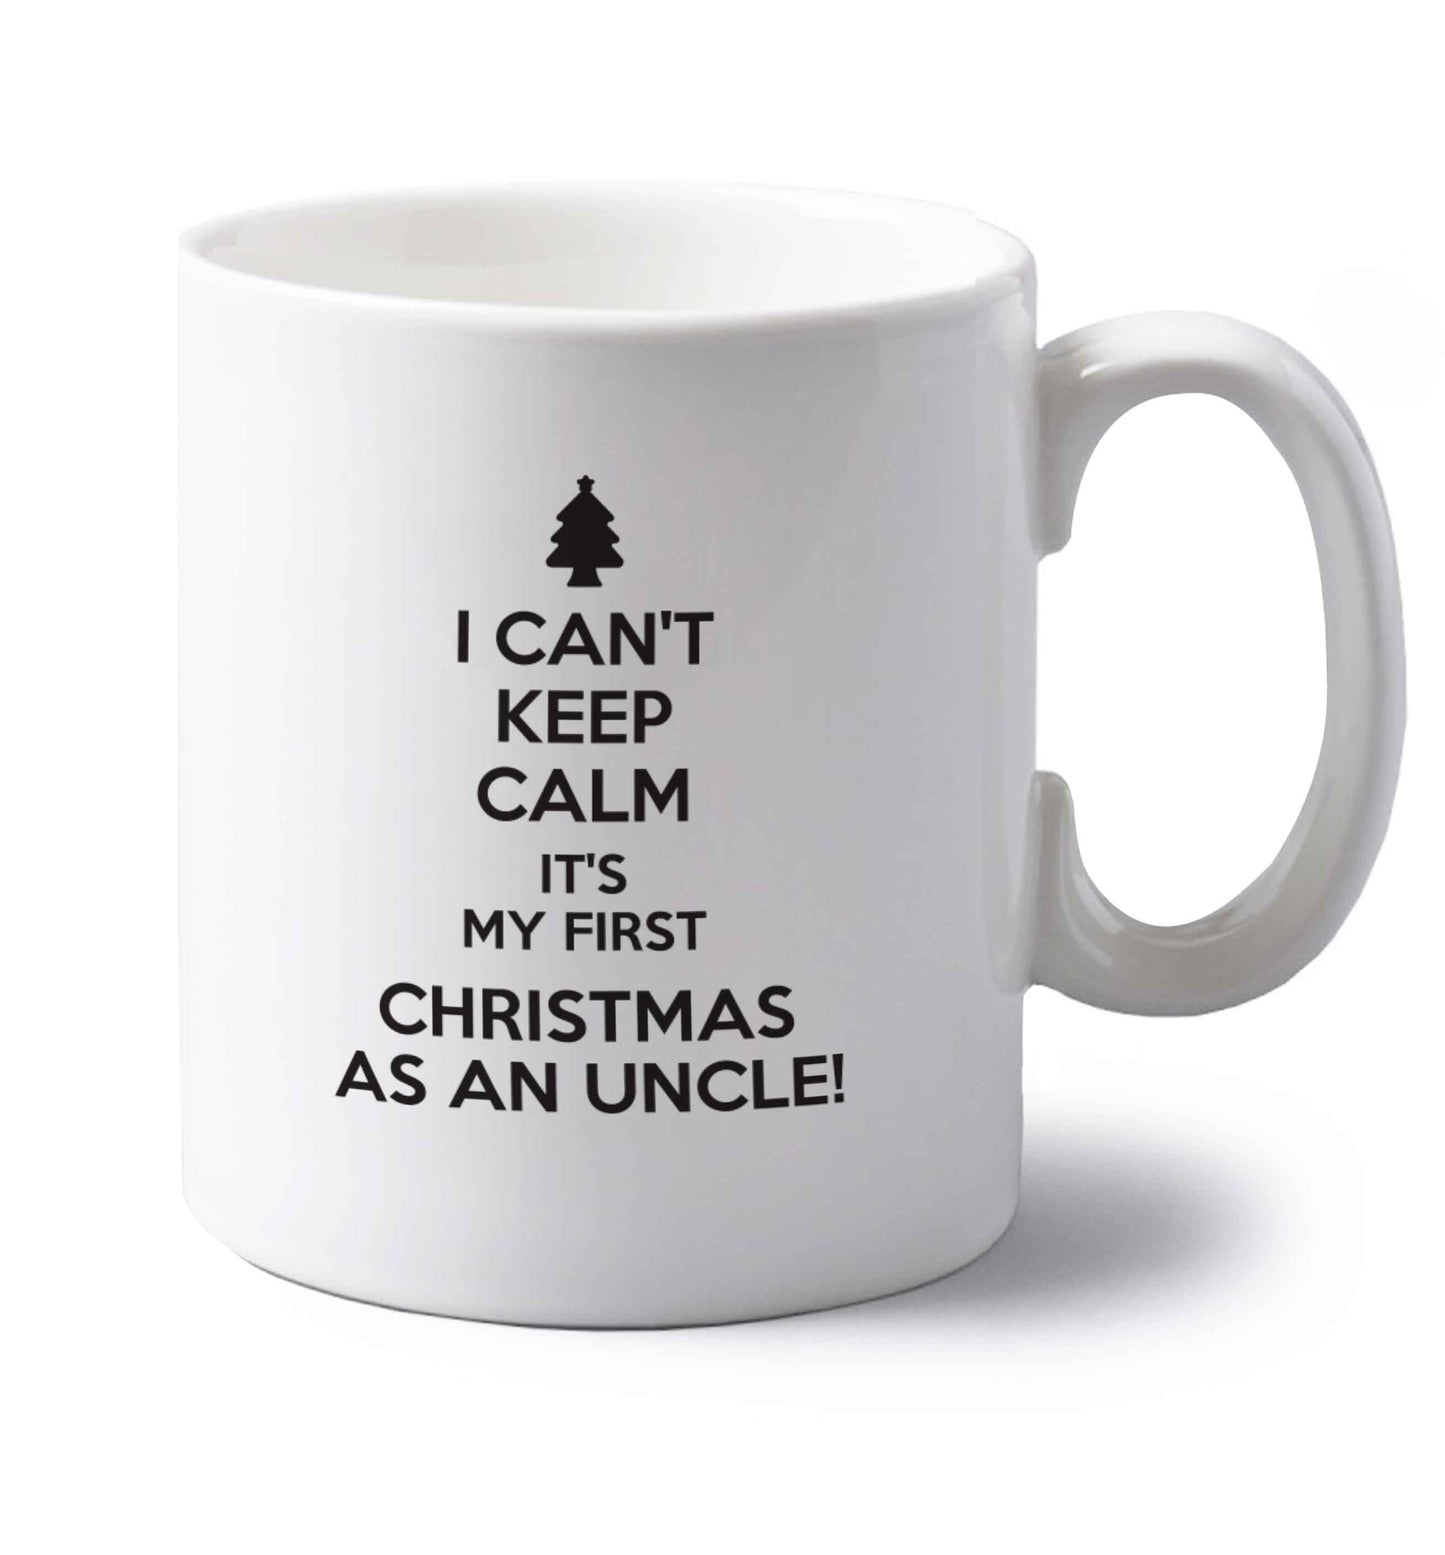 I can't keep calm it's my first Christmas as an uncle! left handed white ceramic mug 